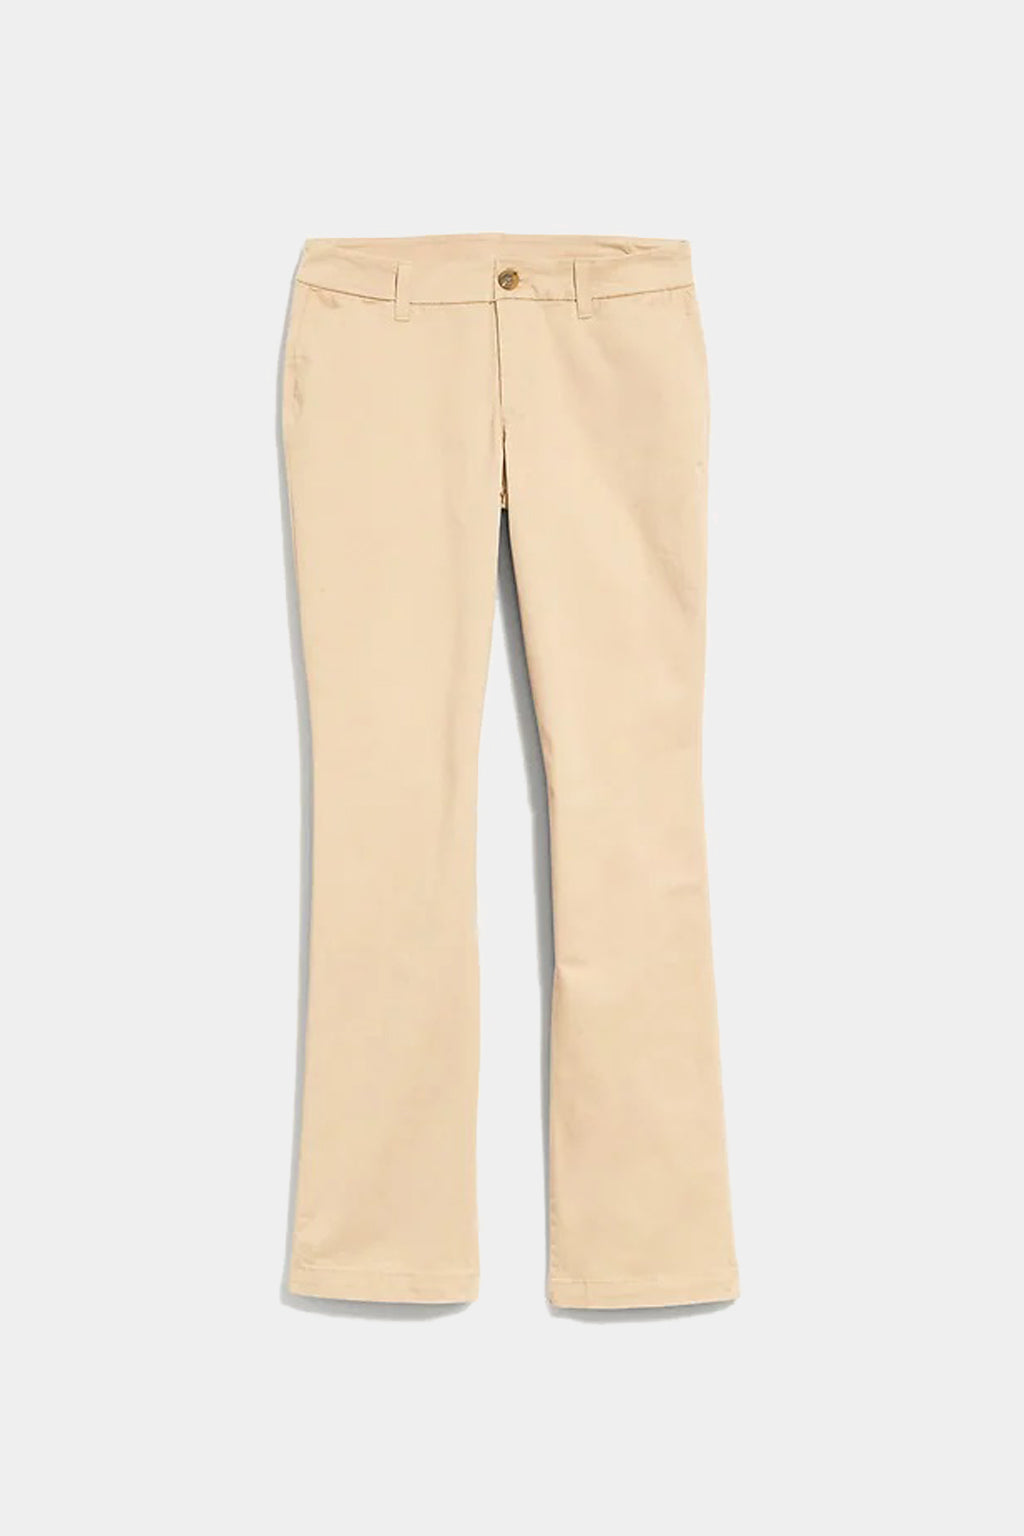 Old Navy - Mid-Rise Boot Cut Pant